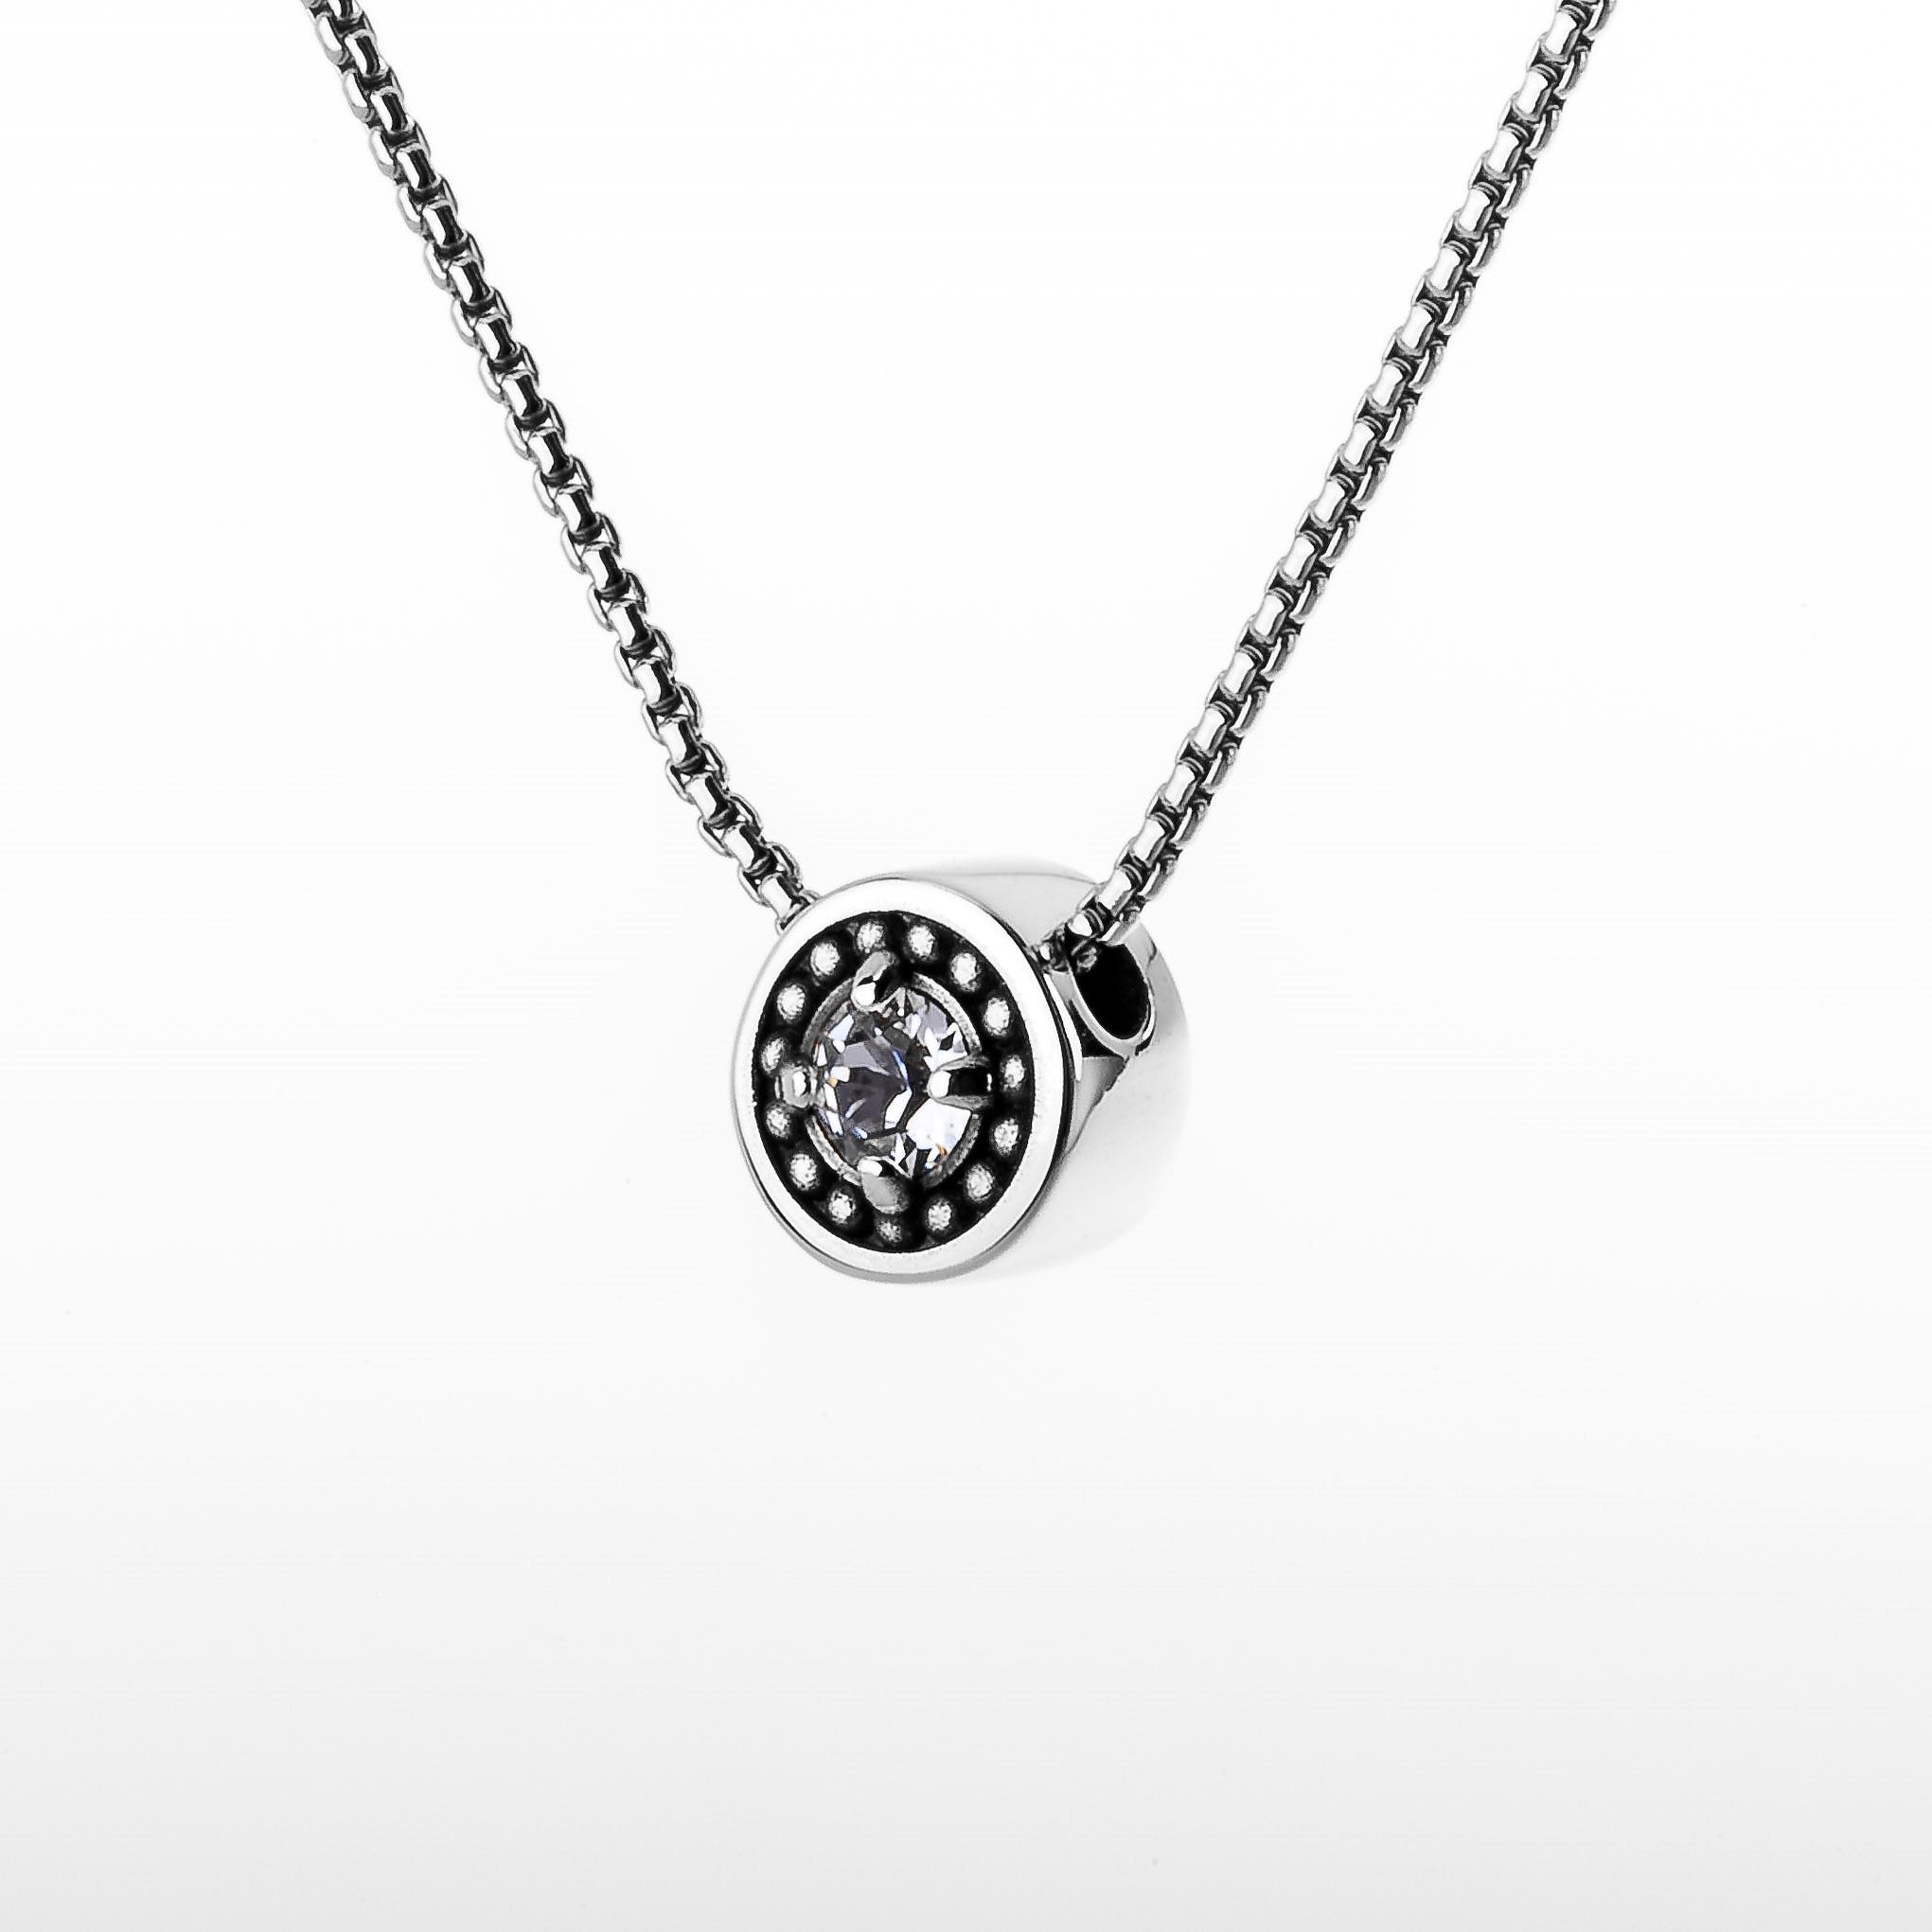 April Birthstone Necklace - The Generations "Petite"